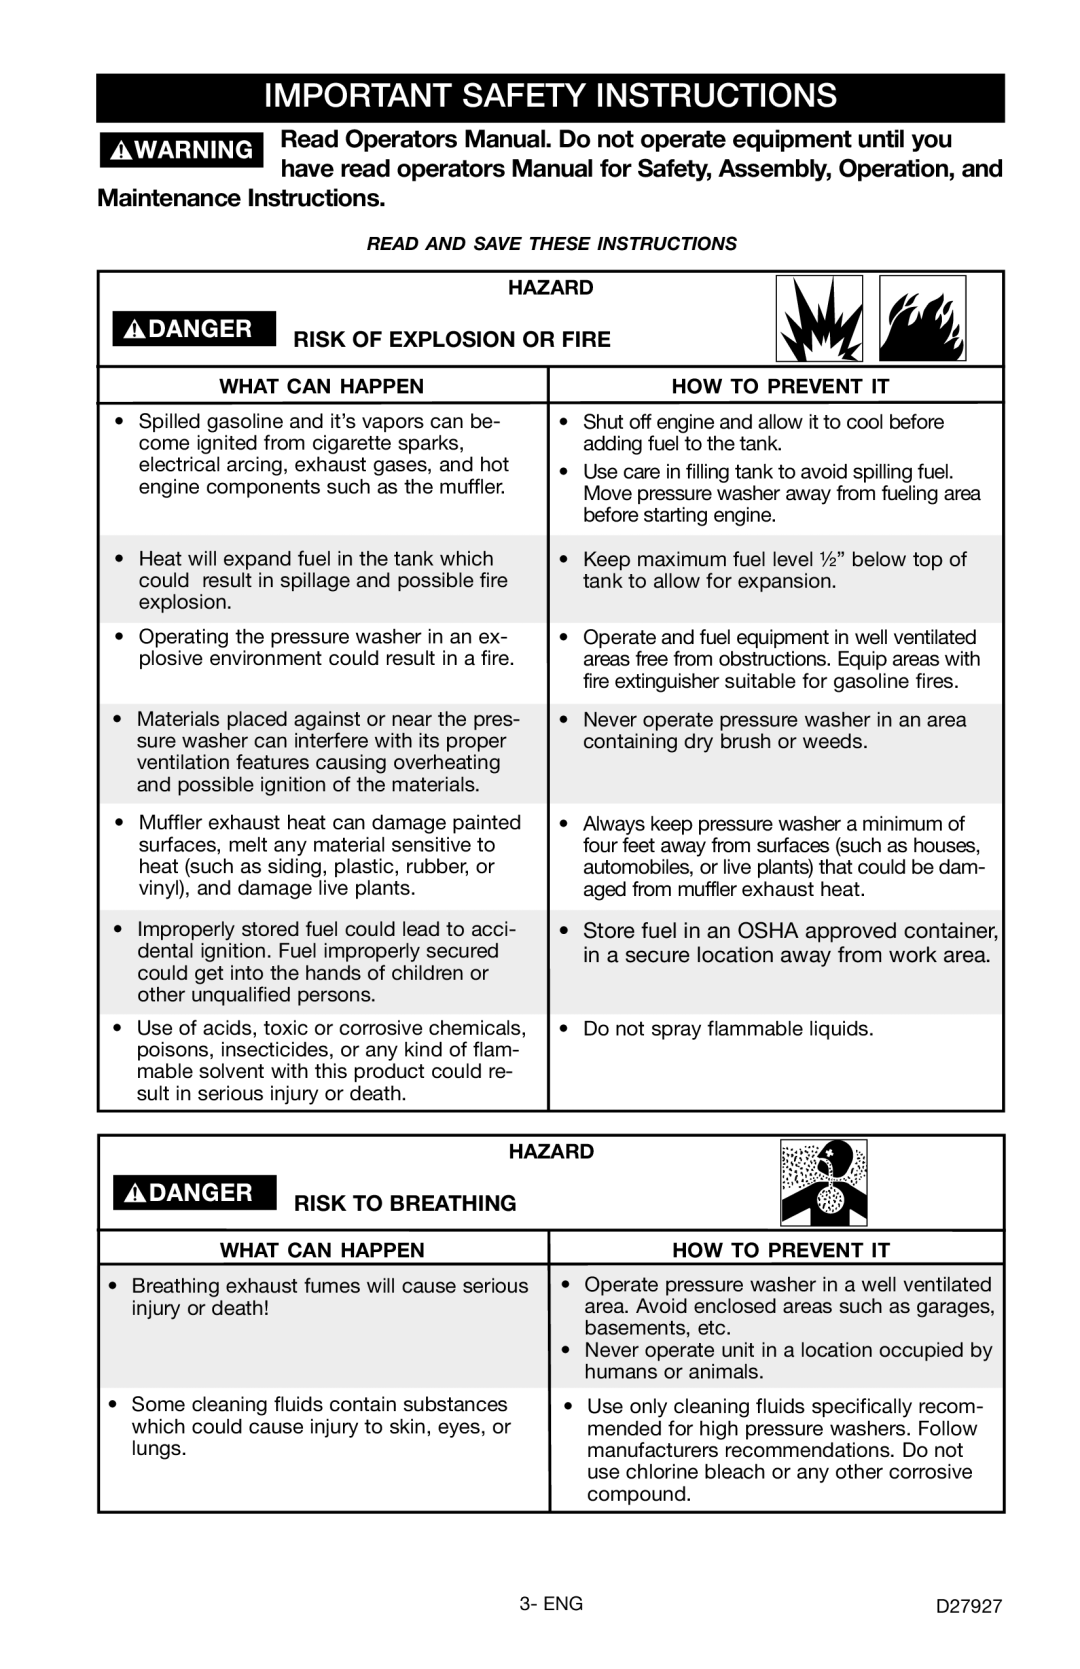 Porter-Cable D27927-034-0, PCK3030SP Important Safety Instructions, Risk Of Explosion Or Fire, Risk To Breathing, Hazard 